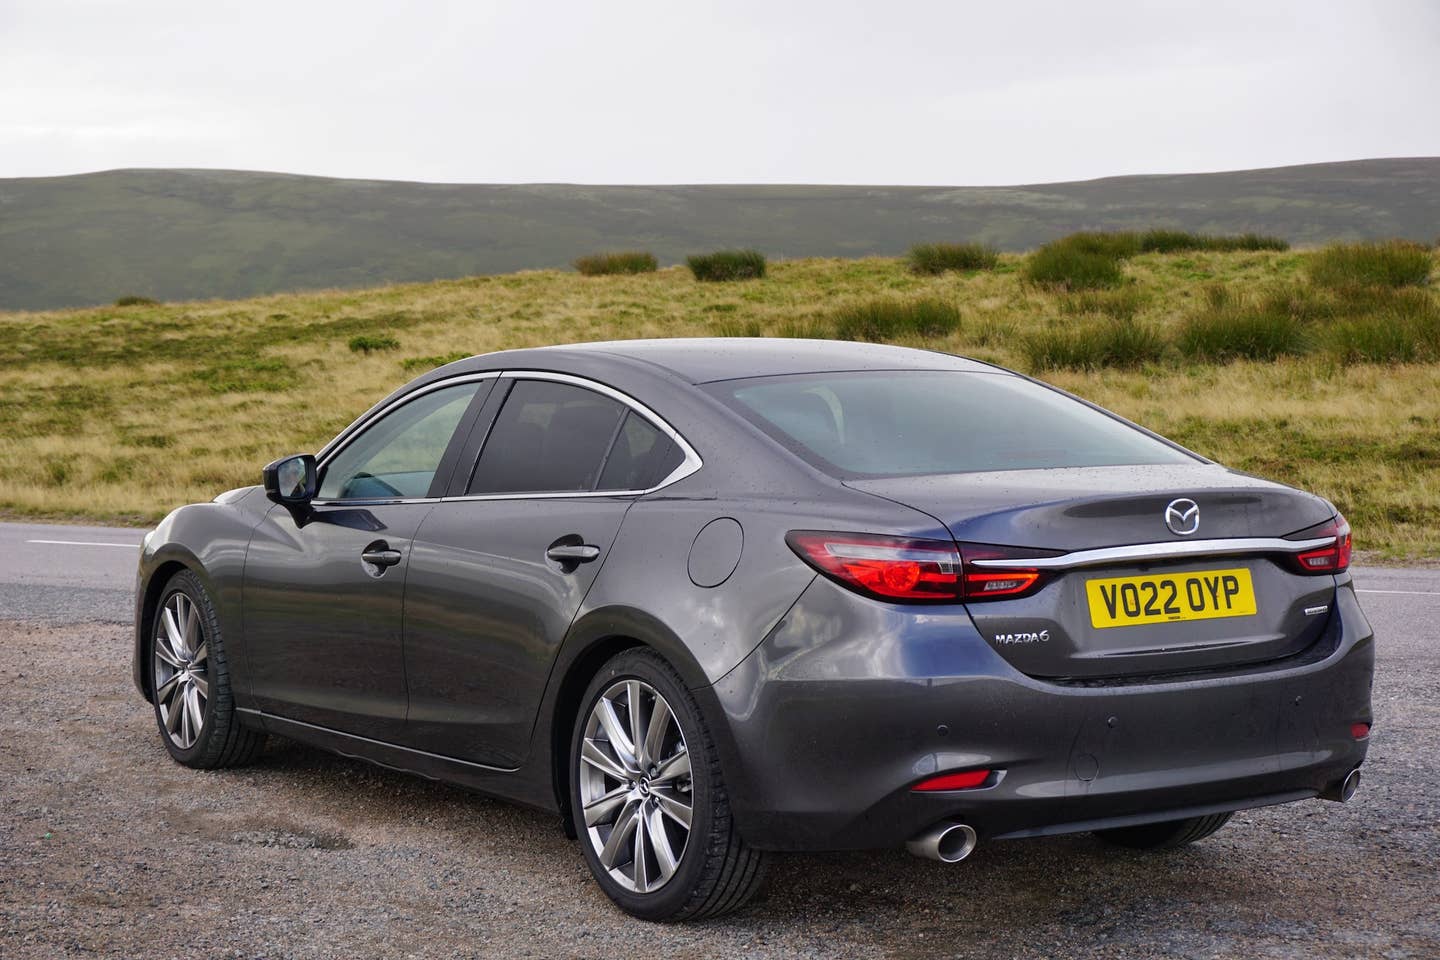 2022 Mazda 6 Manual Review: The Sporty Everyday Sedan That Got Away